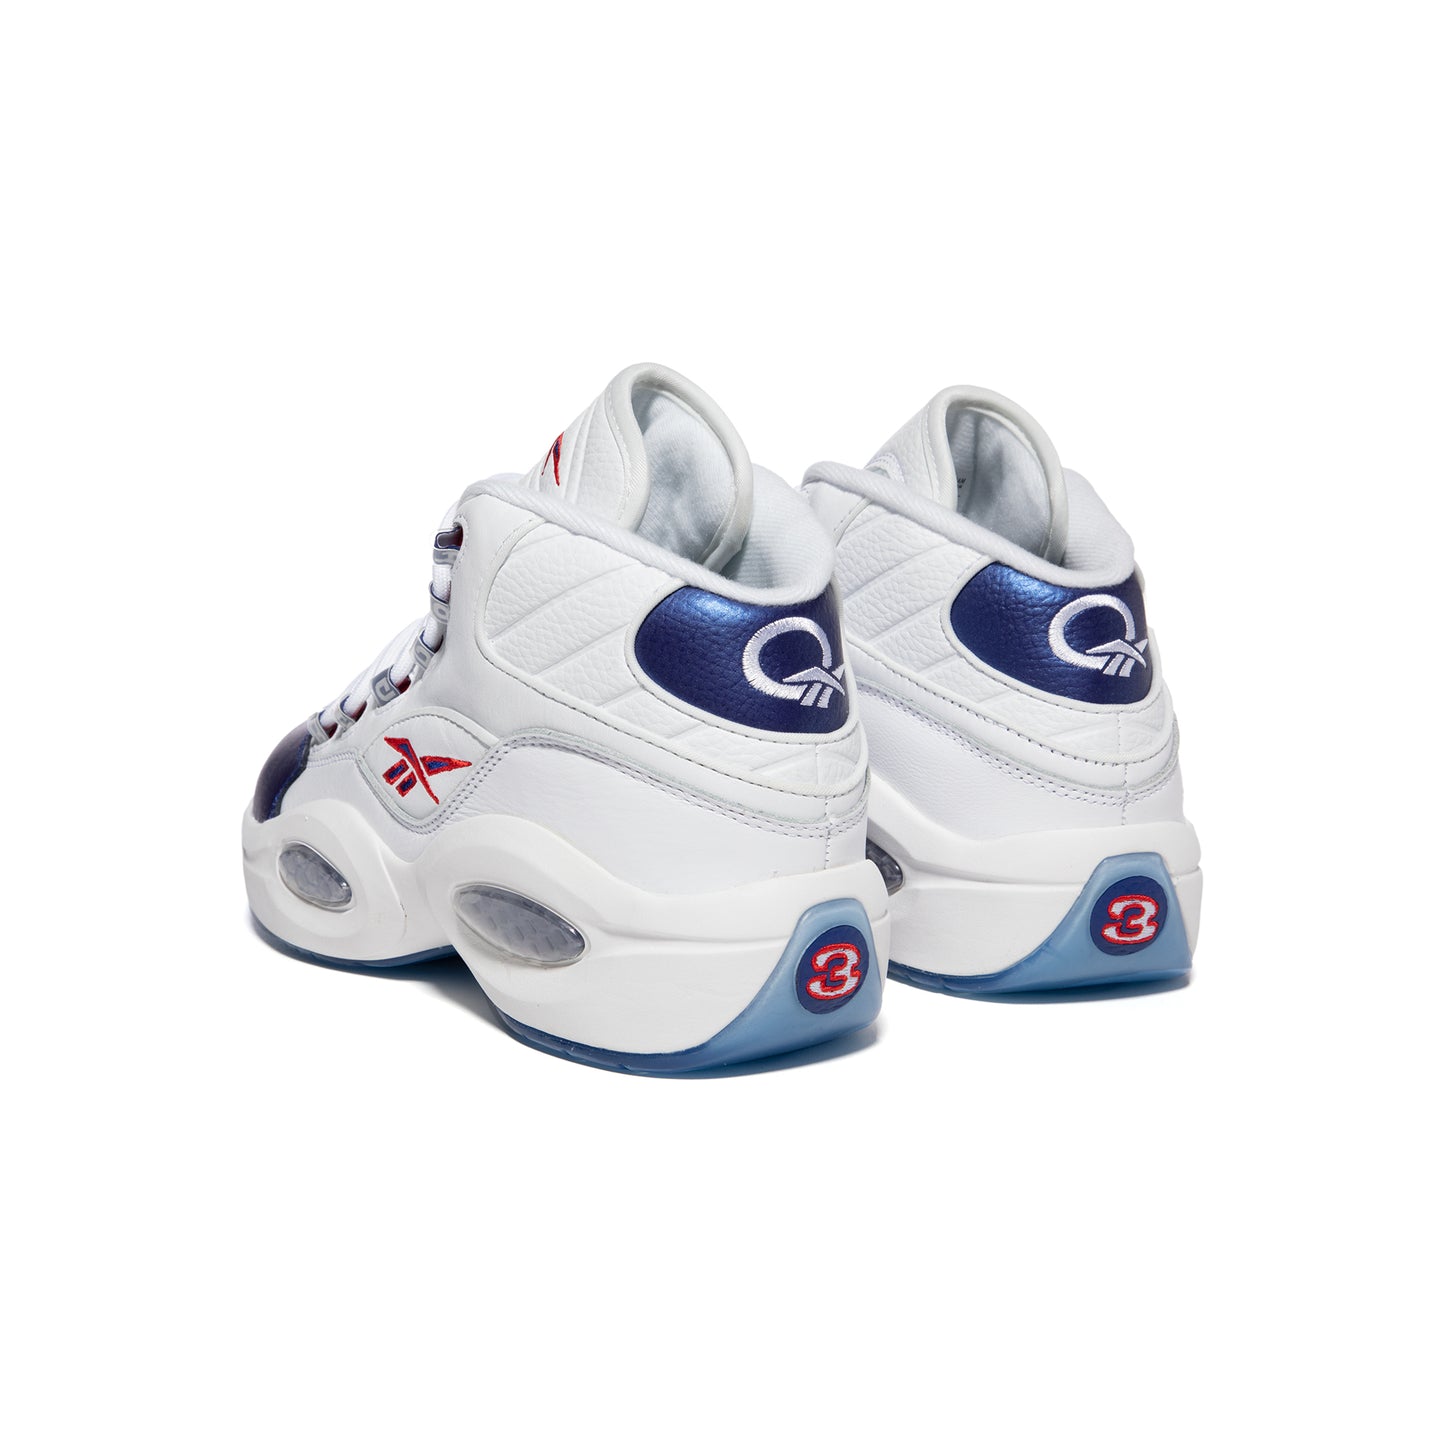 Reebok Question Mid (White/Navy/Red)